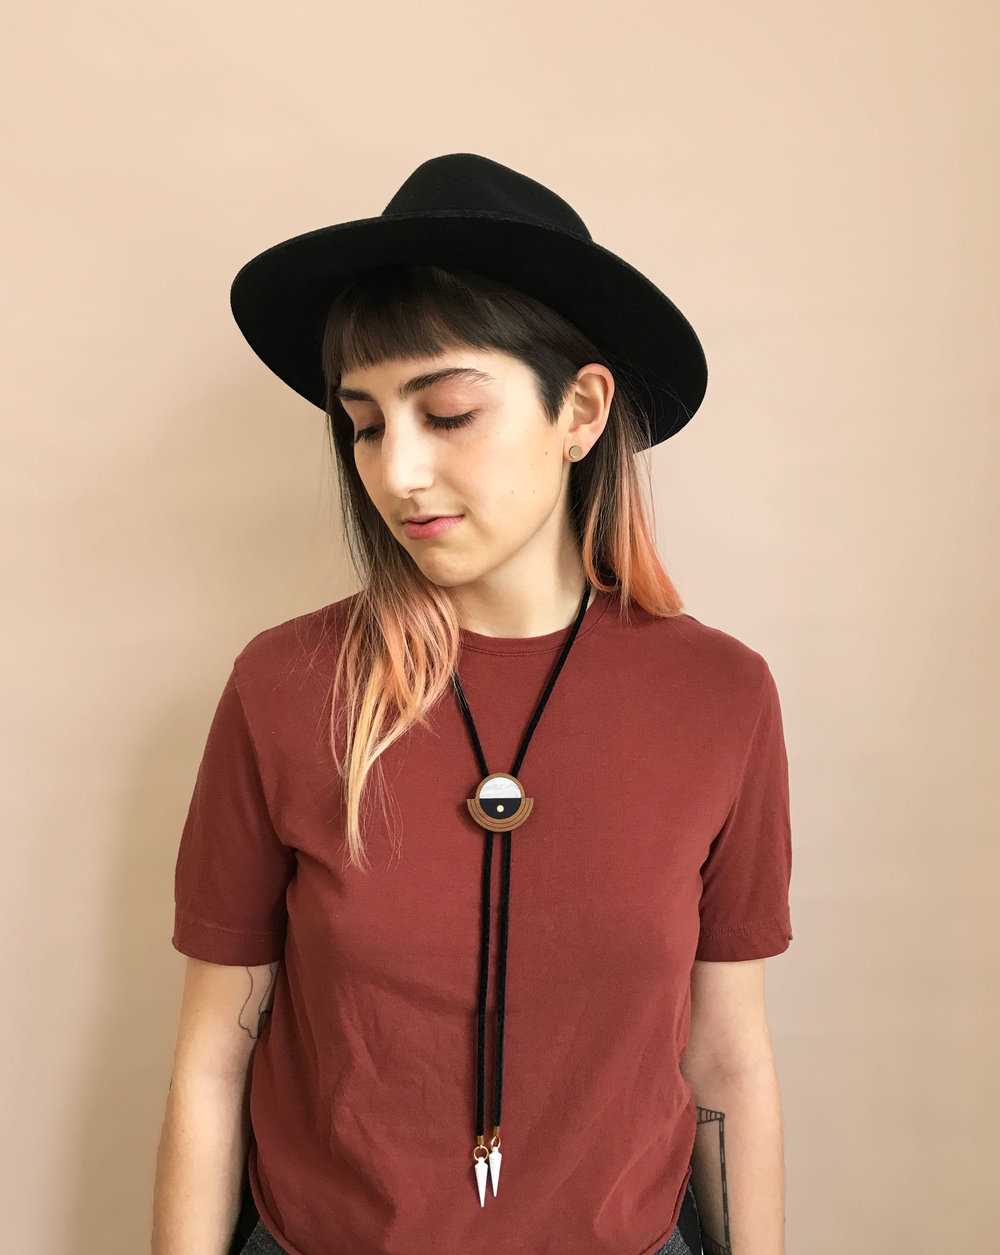 How to wear a bolo tie woman